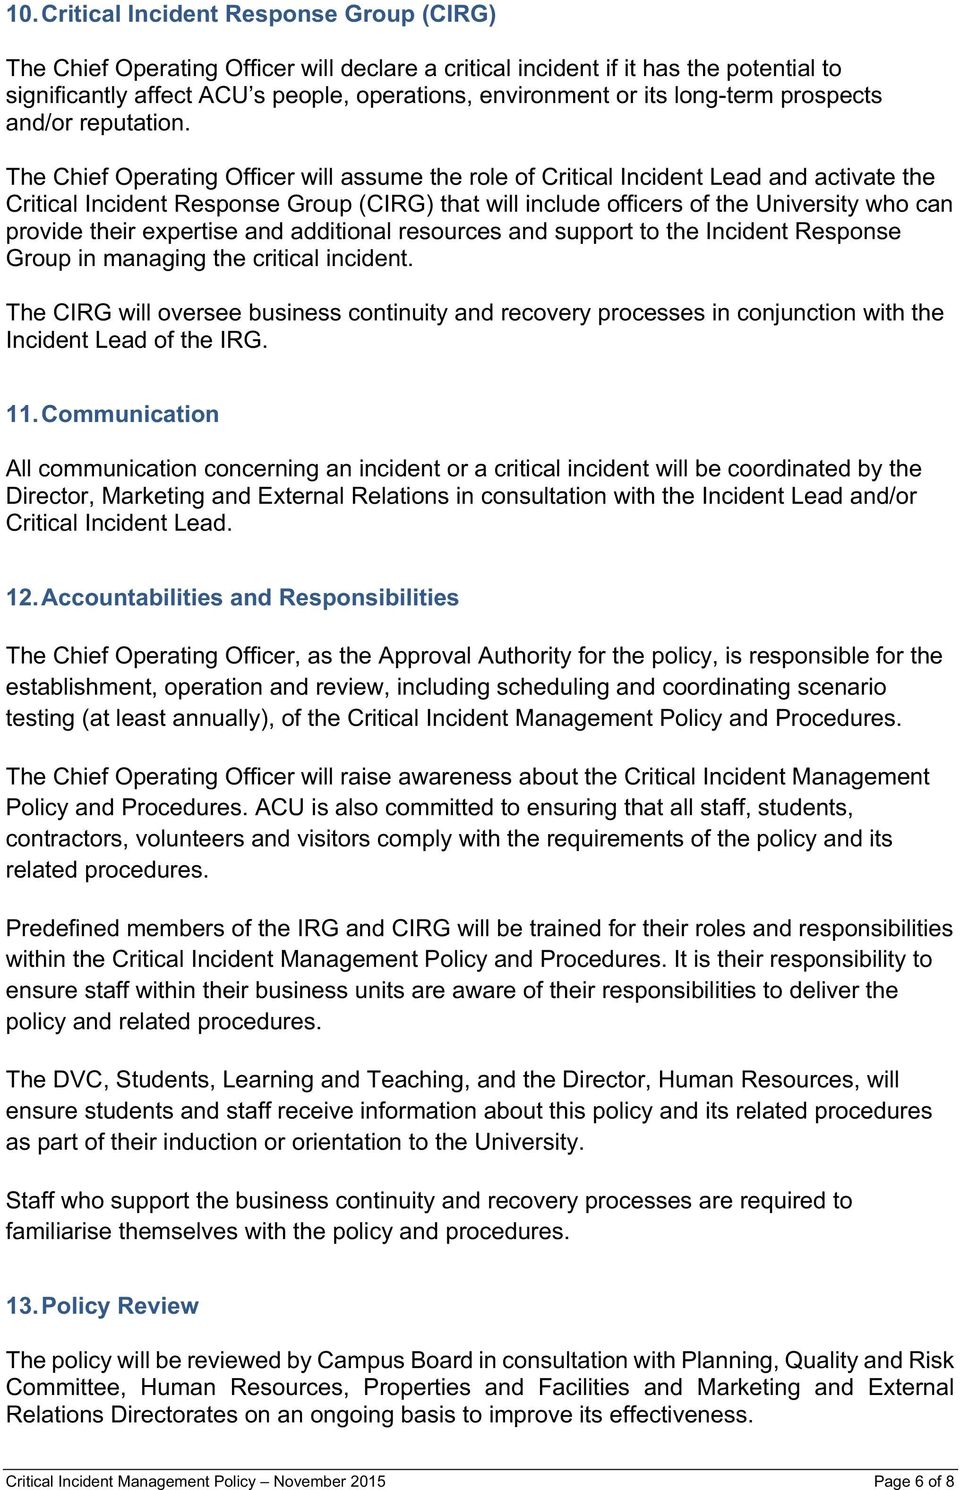 The Chief Operating Officer will assume the role of Critical Incident Lead and activate the Critical Incident Response Group (CIRG) that will include officers of the University who can provide their